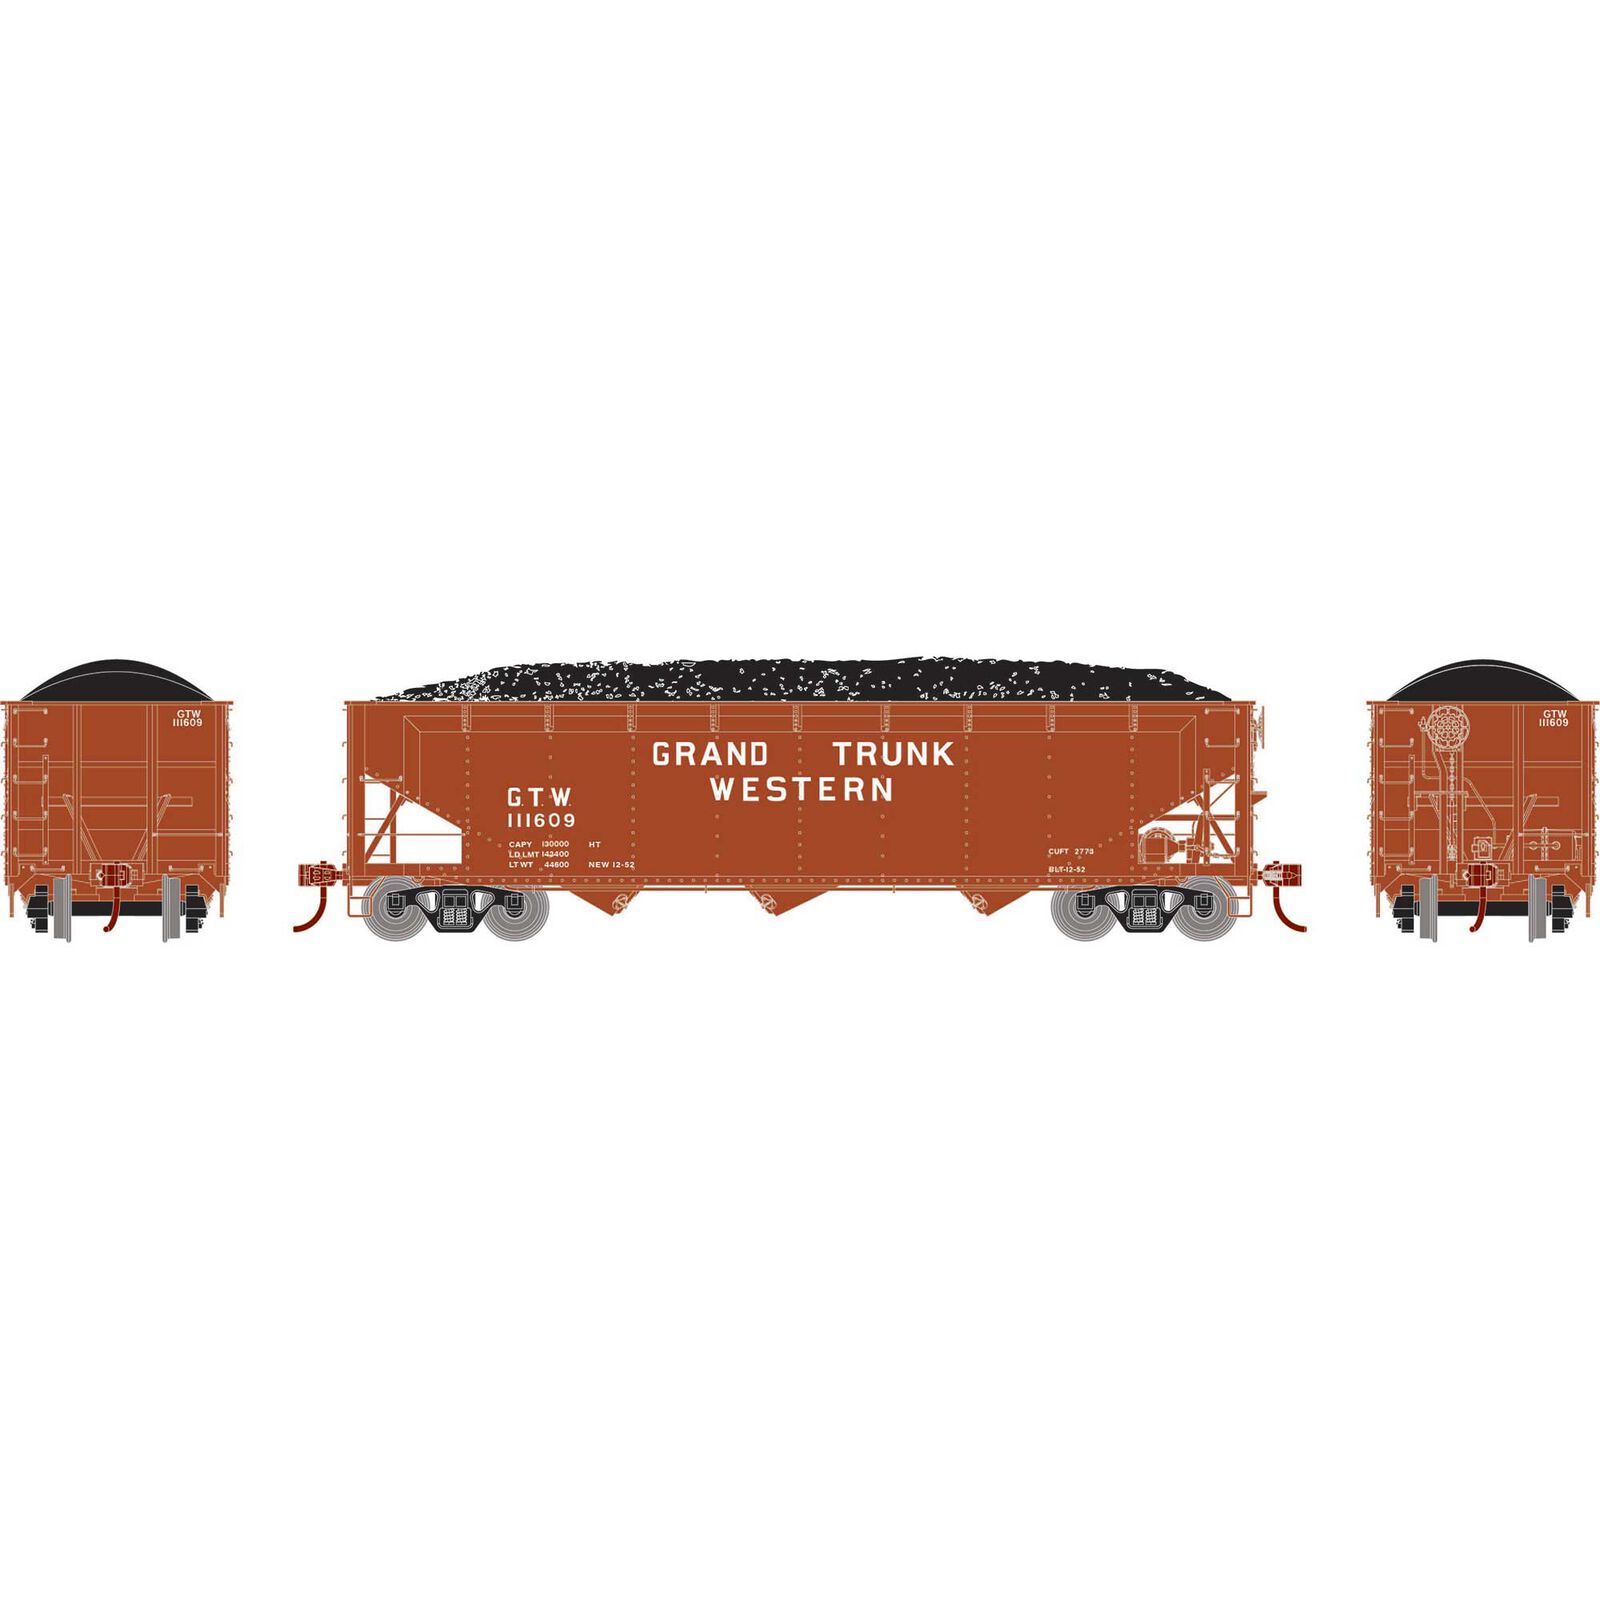 HO 40' Offset Coal Hopper with Load, GTW #111609